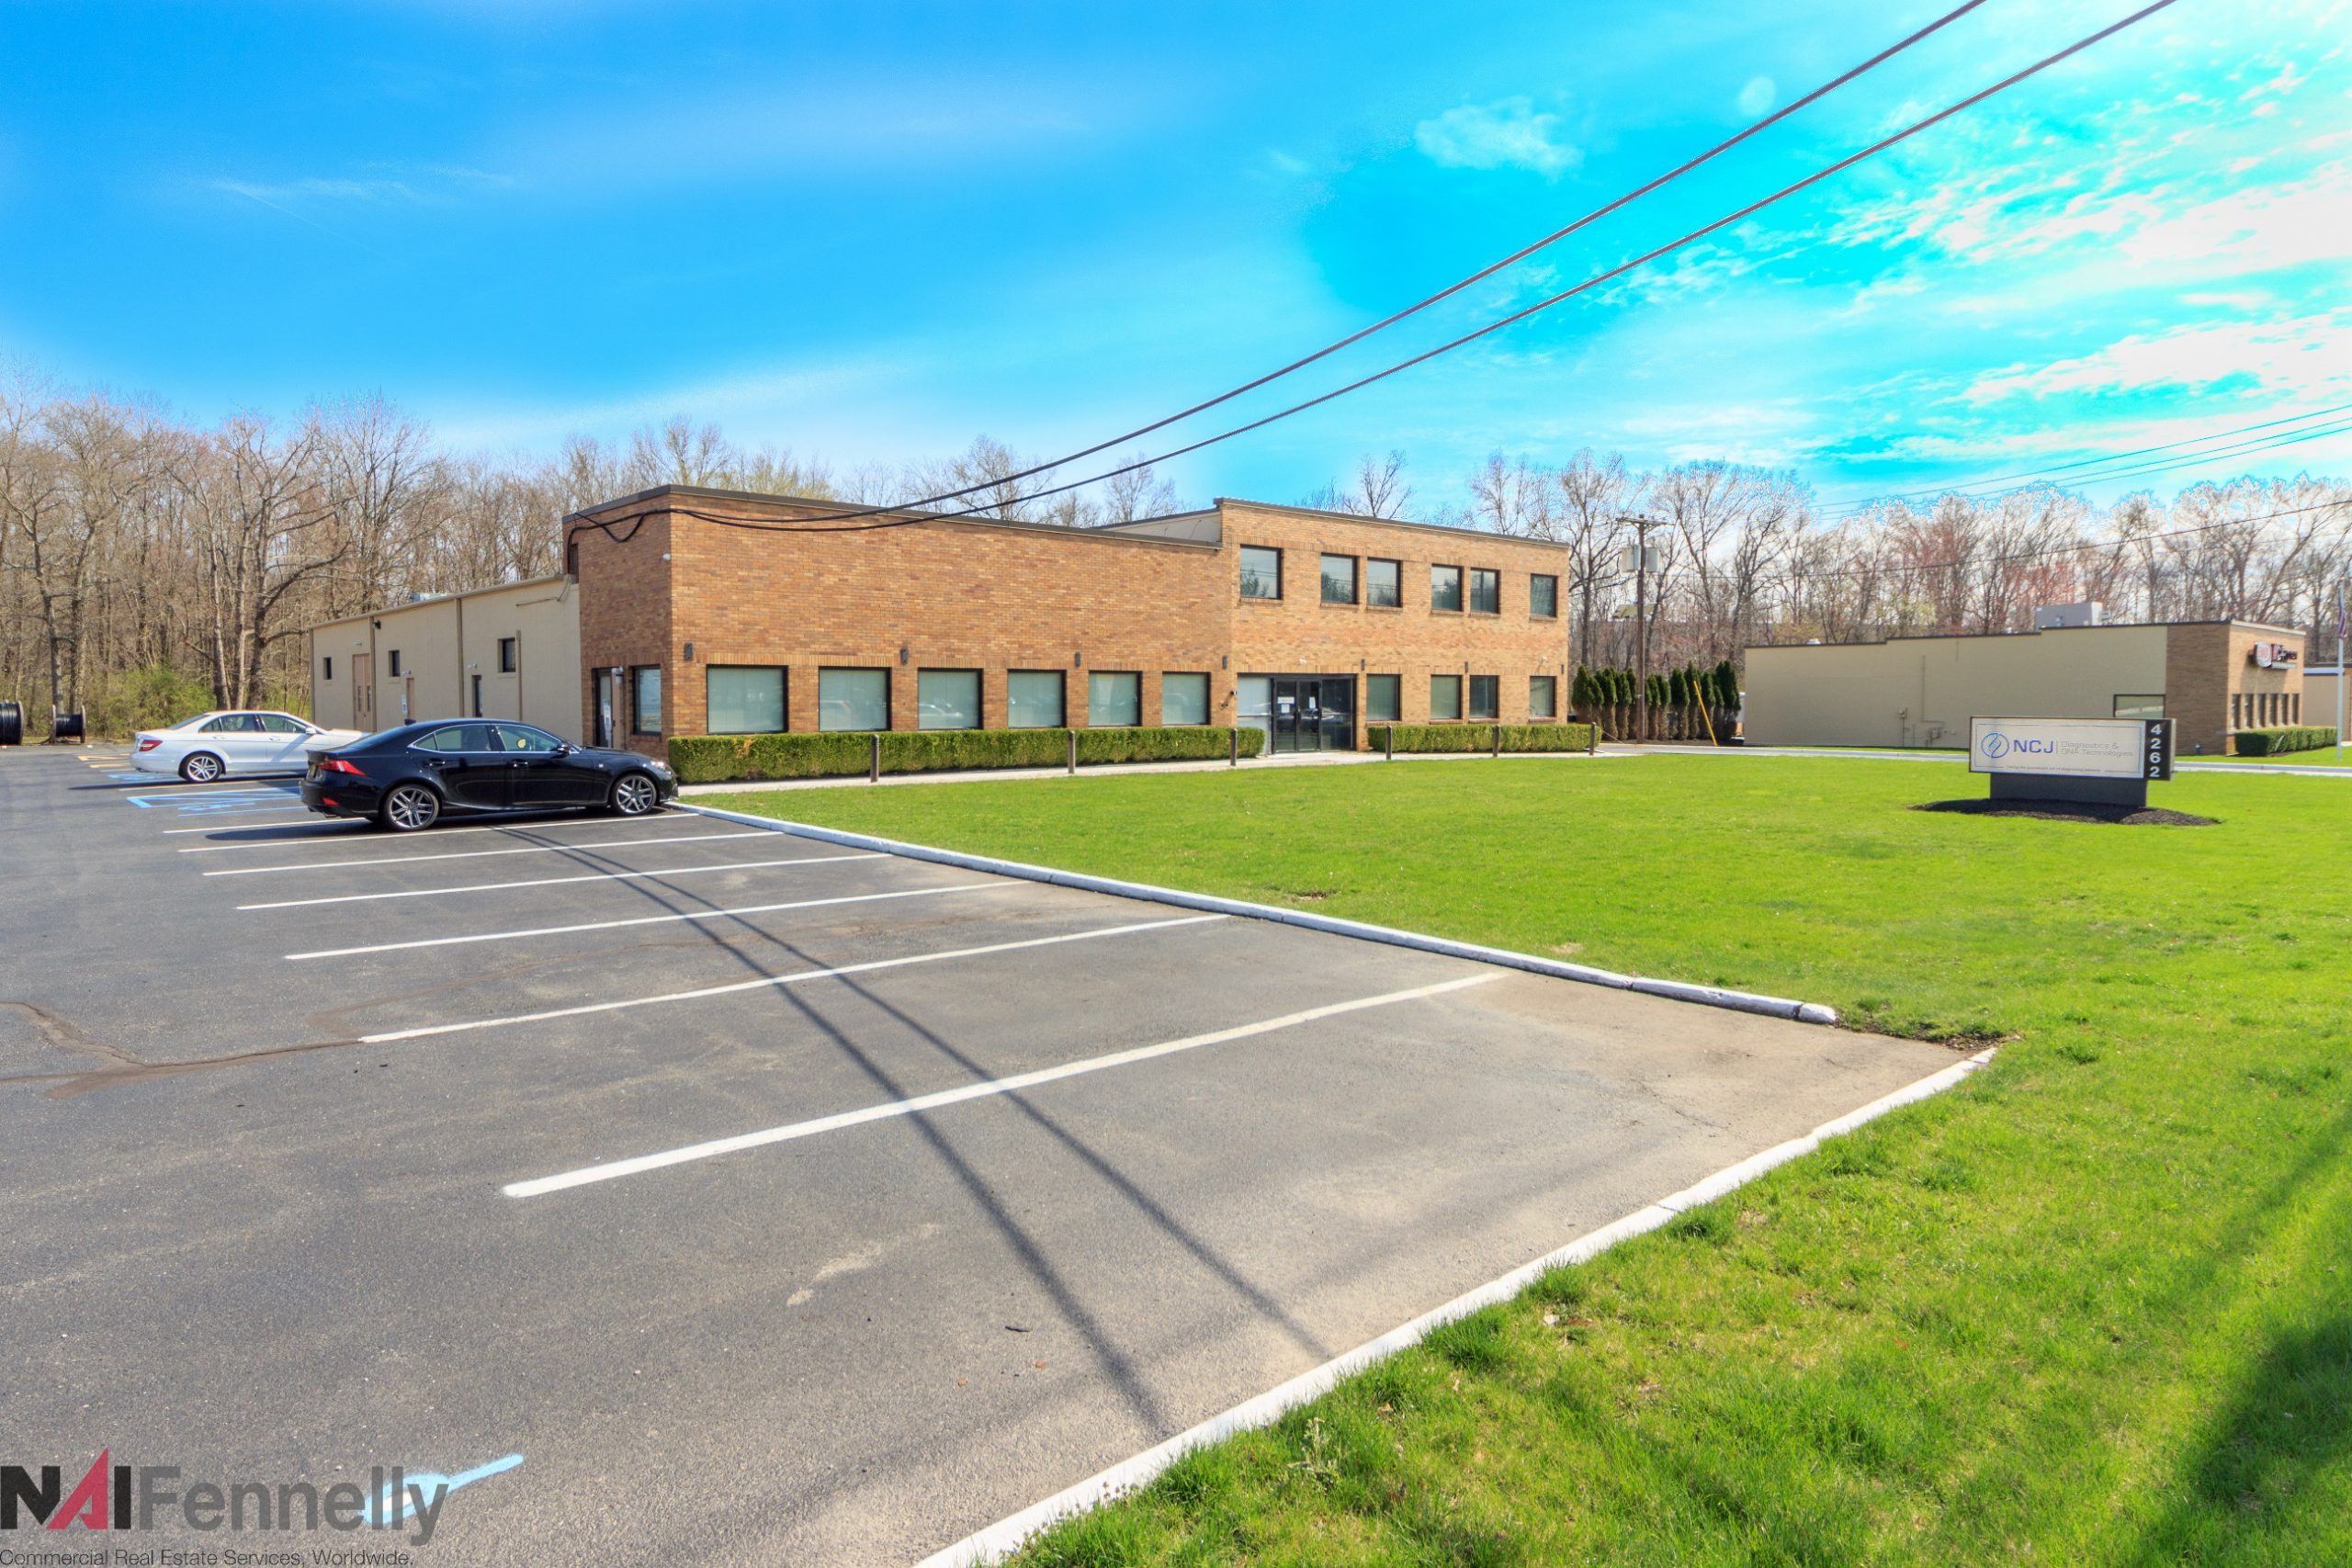 Fennelly Negotiates $1.775-Million Sale in South Brunswick to Complete Disposition of Six-Building, 160,000-Square-Foot Real Estate Portfolio